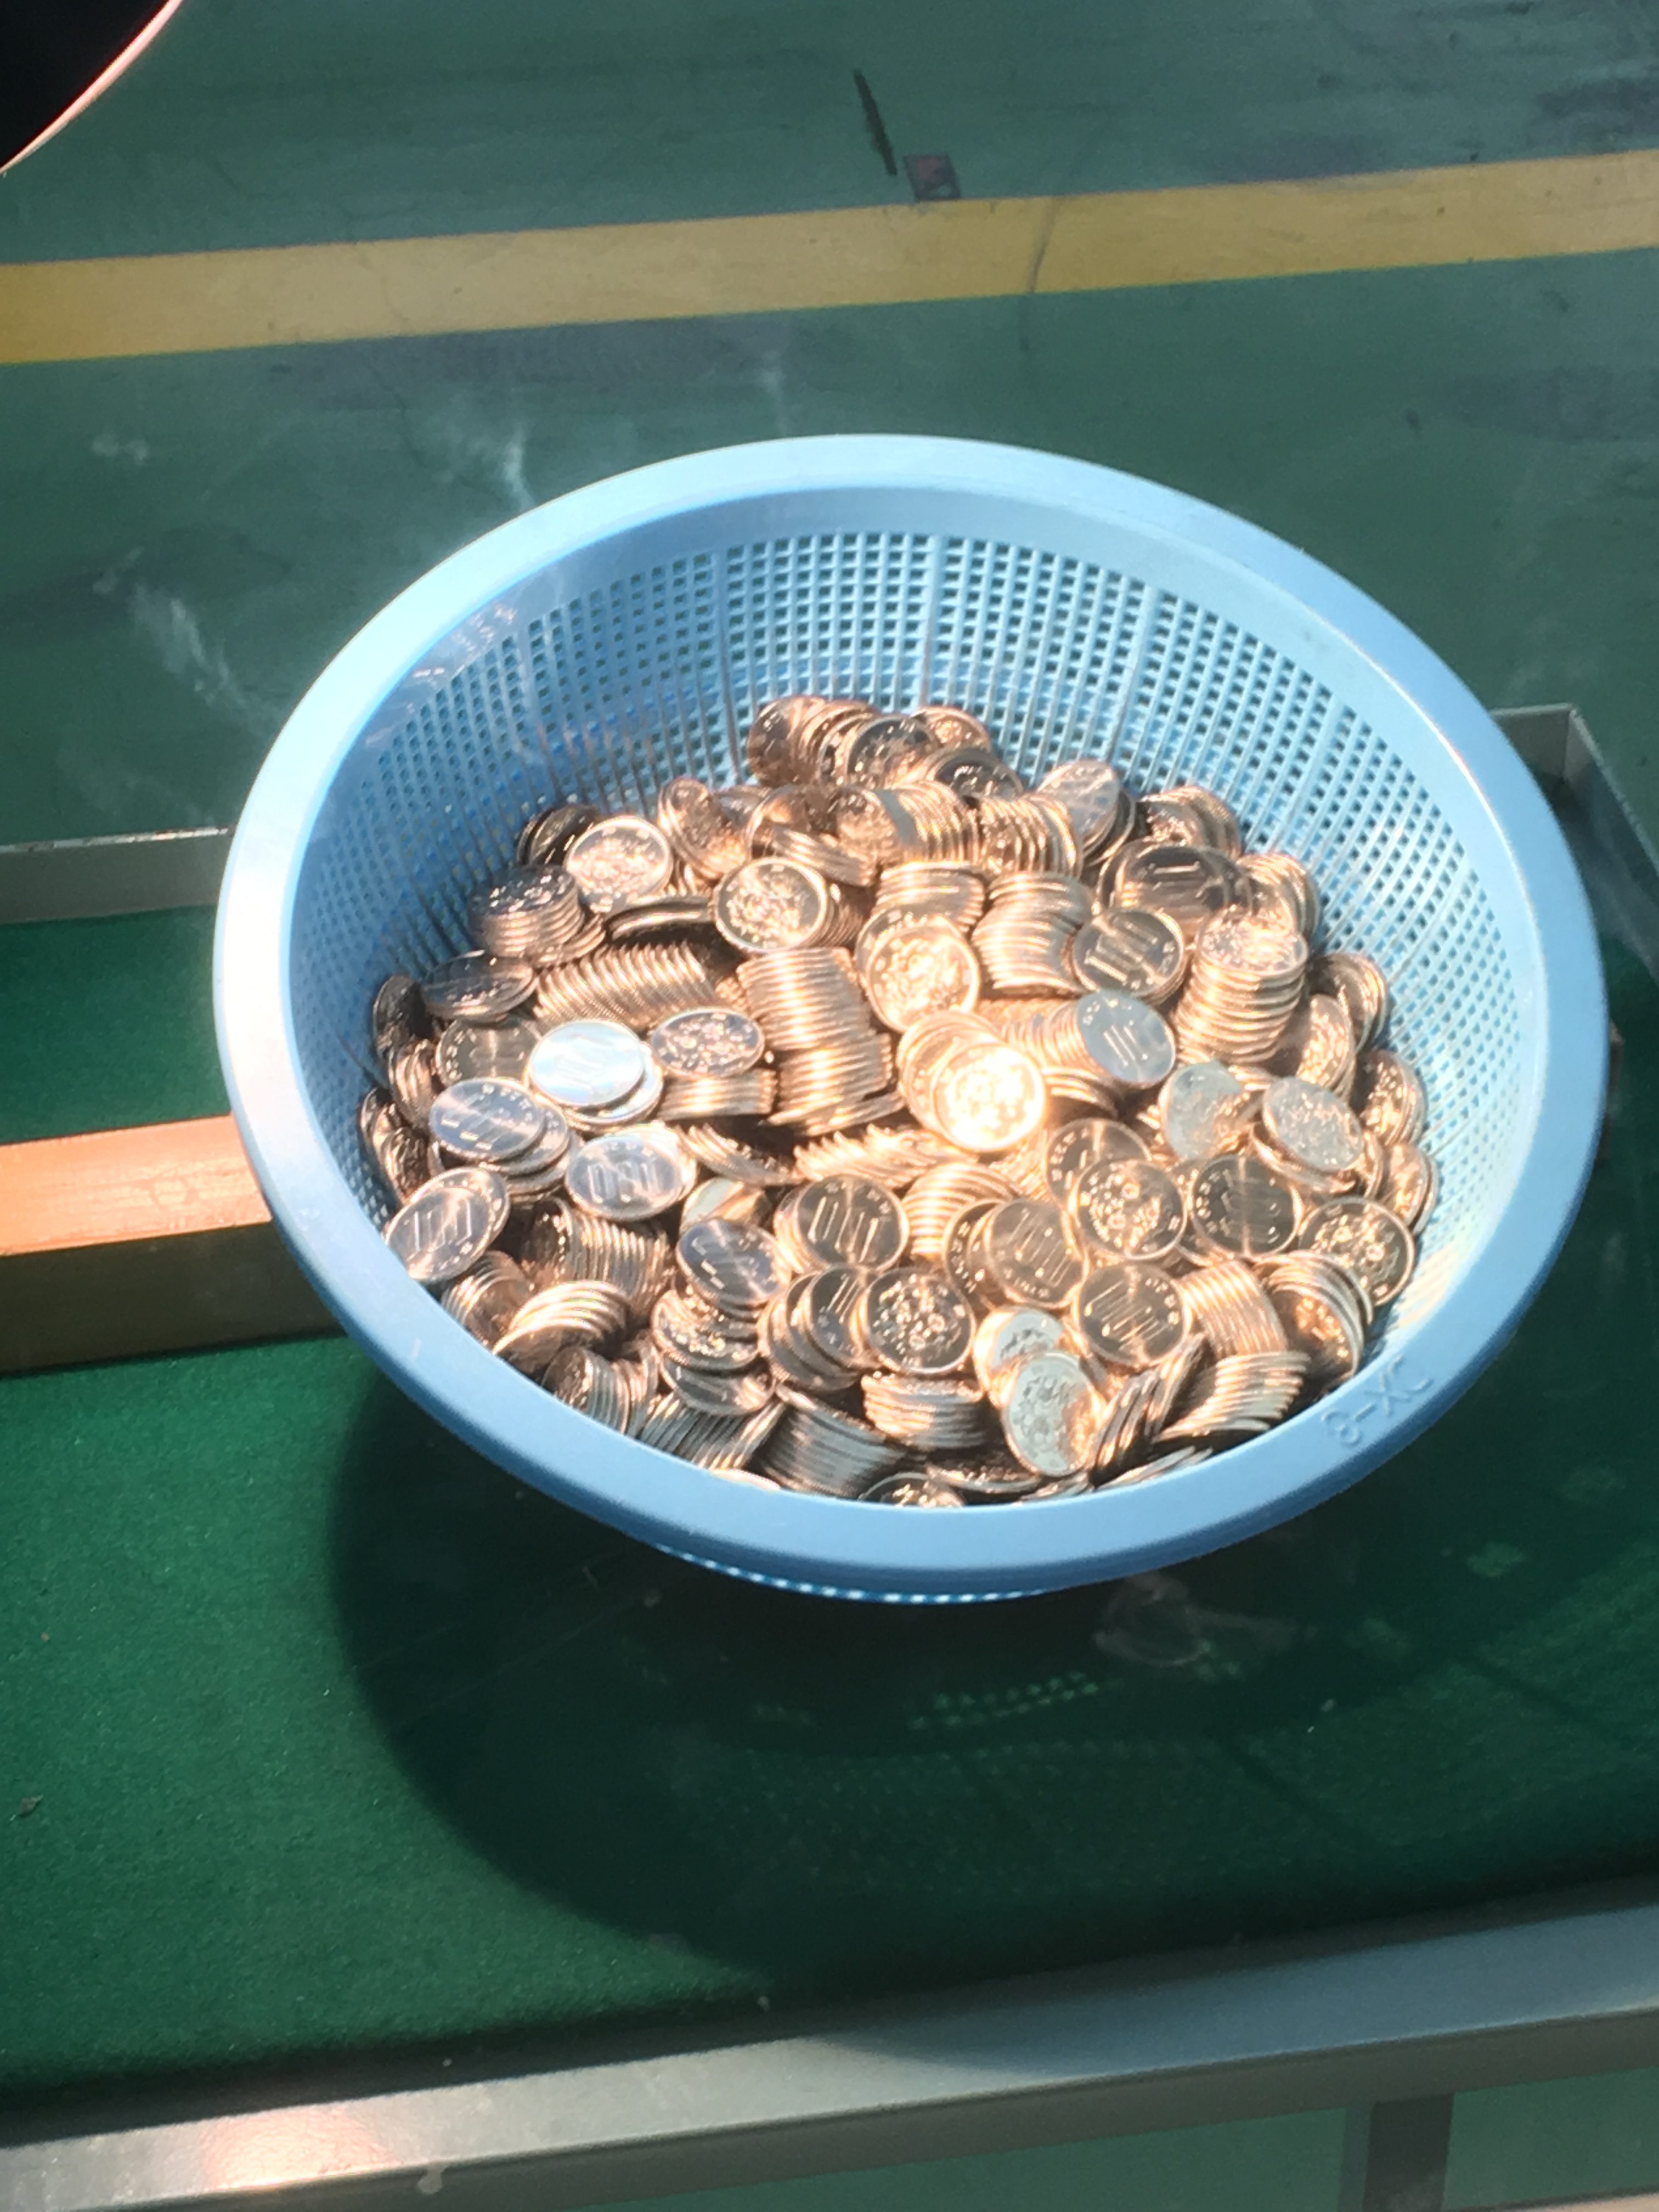 freshly minted 100 yen coins at the Japan Mint